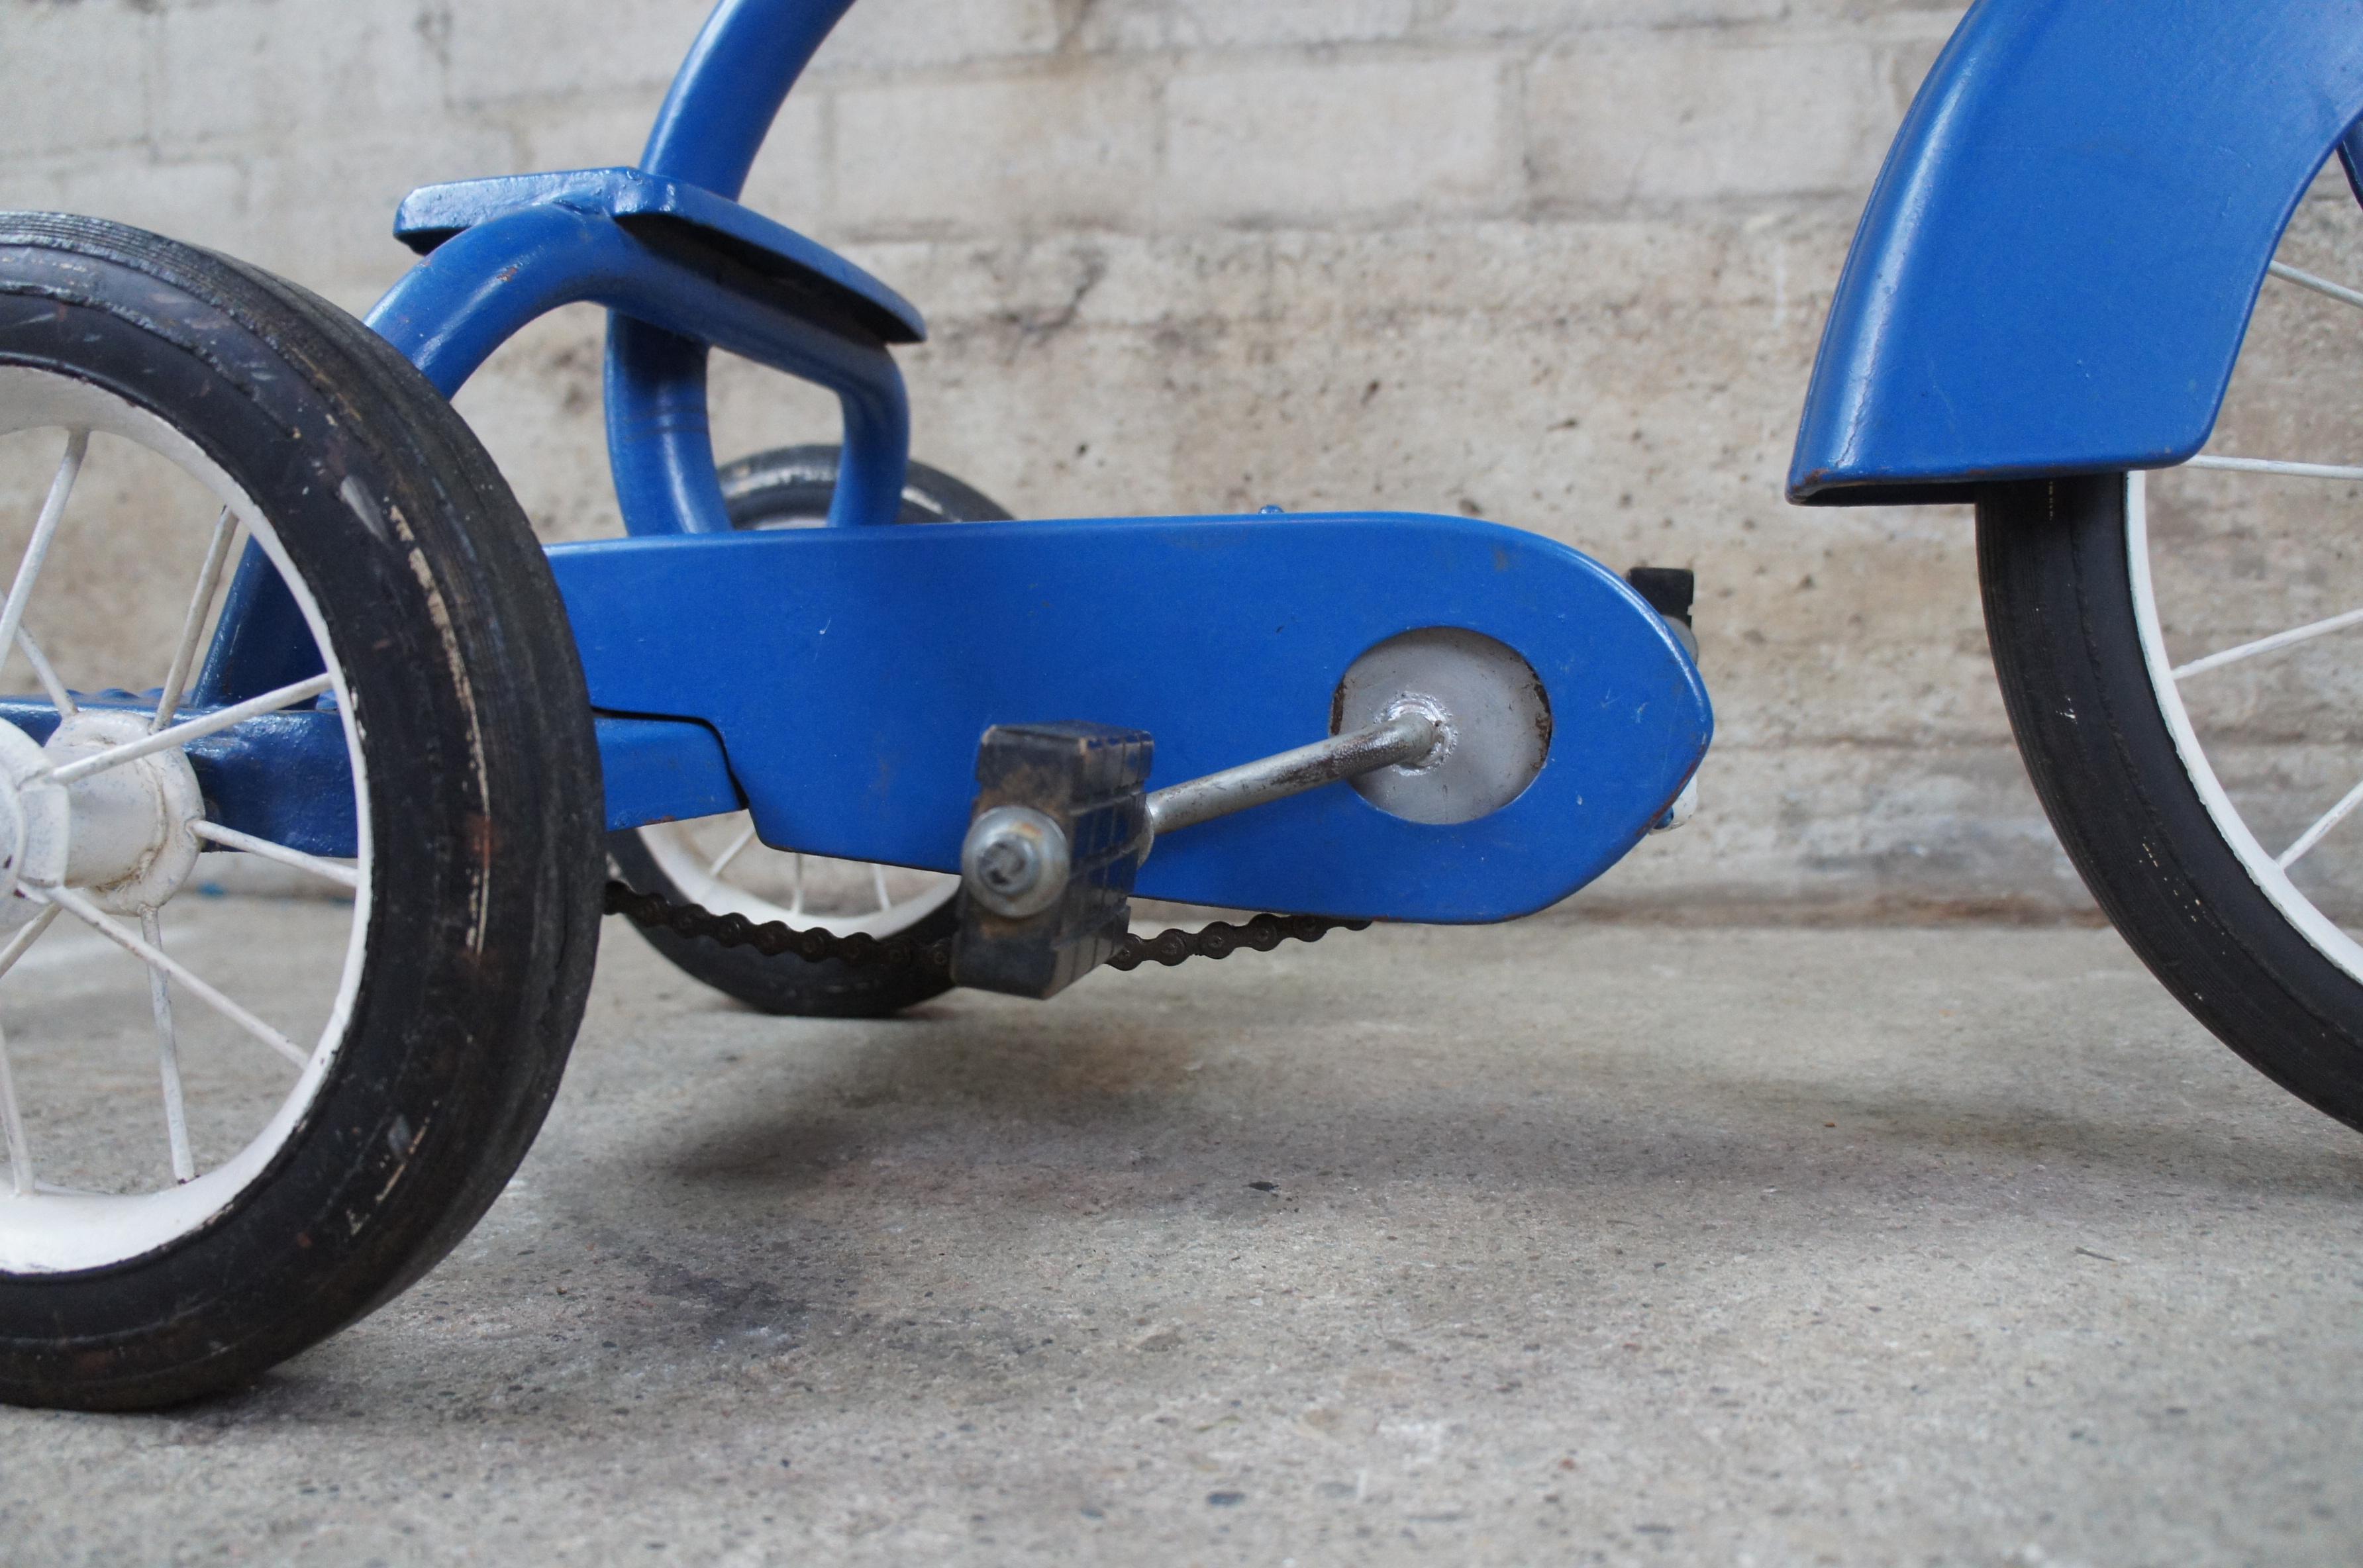 1960s Vintage Western Flyer Blue & White Childs Tricycle Pedal Bike Atomic 1